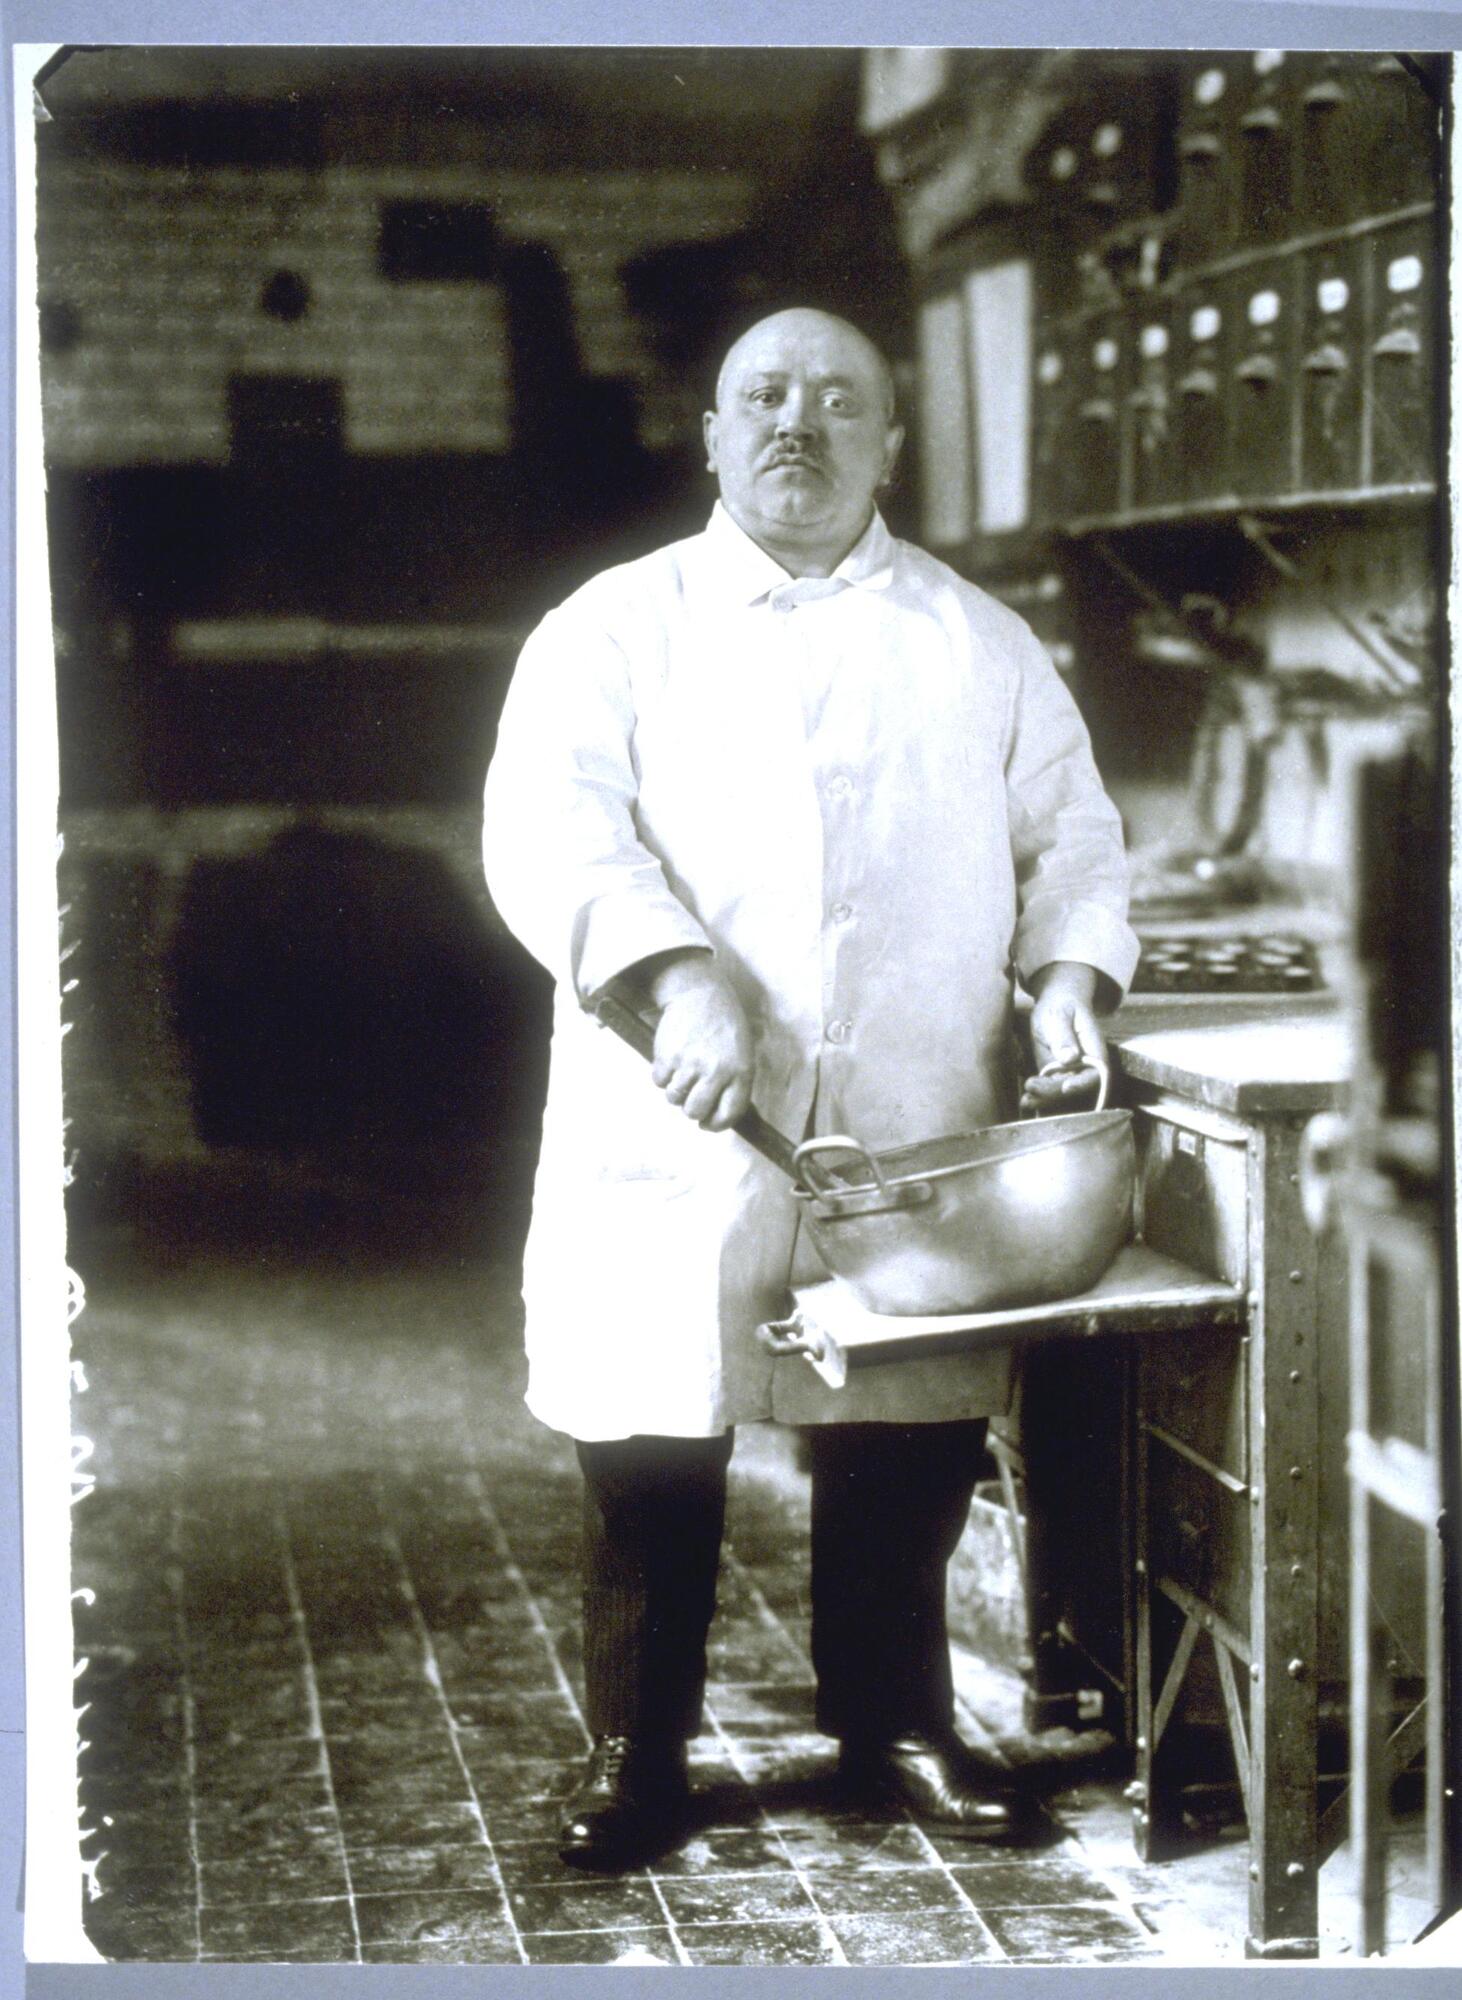 A formal portrait of a pastry chef in his commercial kitchen. 